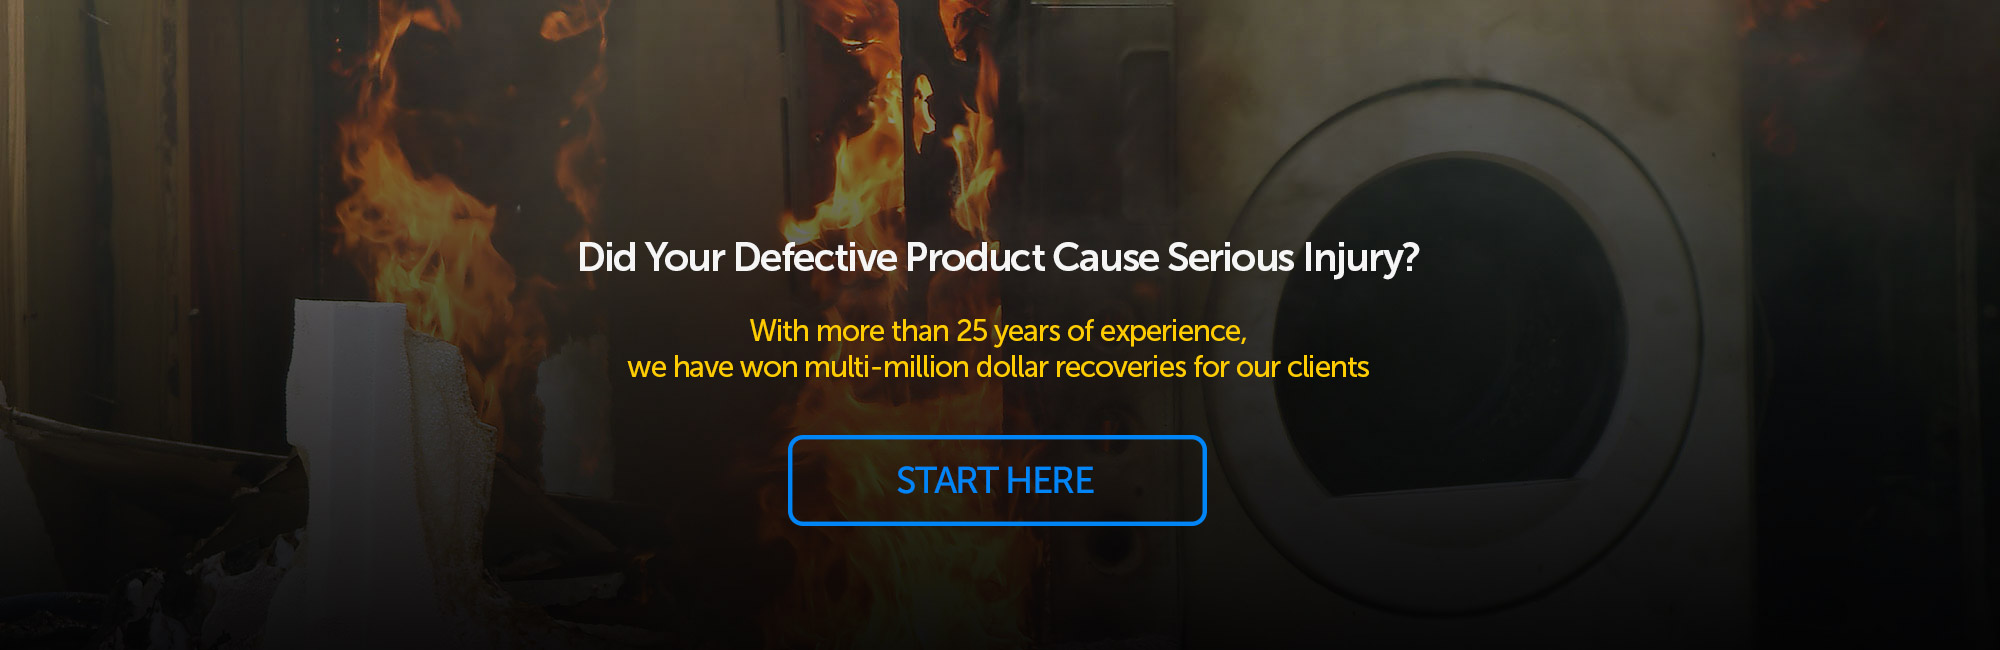 Did Your Defective Product Cause Serious Injury?